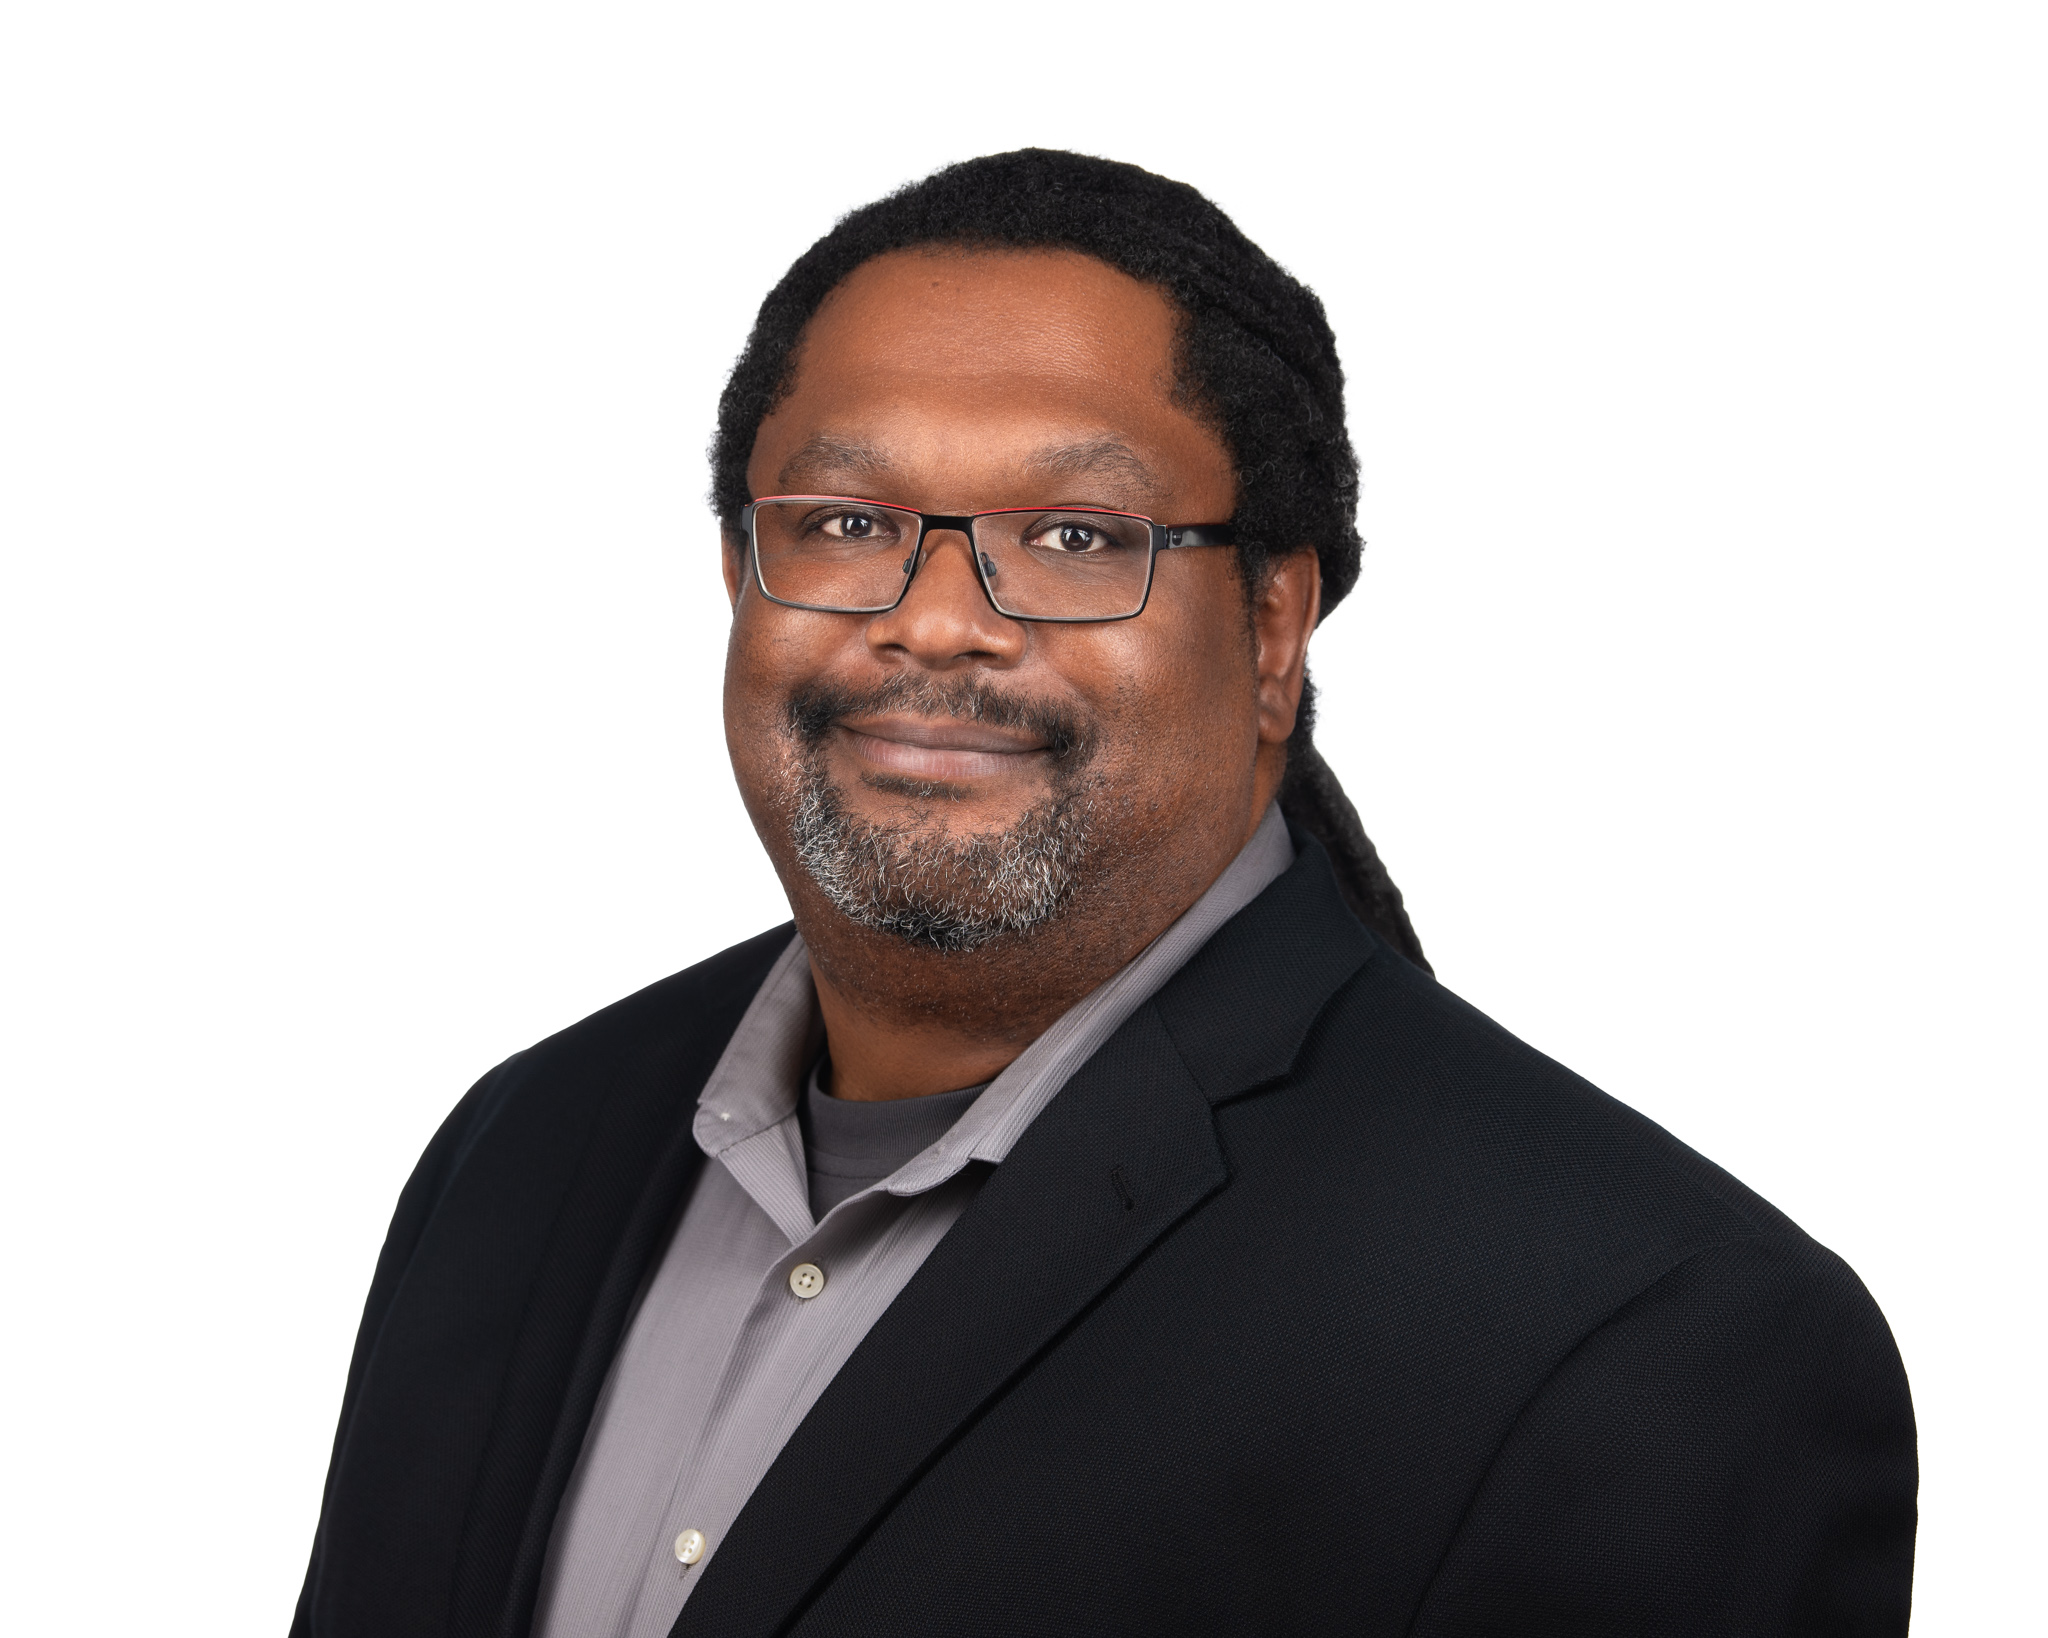 Tony Spears is a Consulting Director with Solutia Consulting and is an experienced mobile and full-stack developer in a variety of industries.  His areas of expertise include mobile, desktop, client/server, cloud development and integration, and IoT.